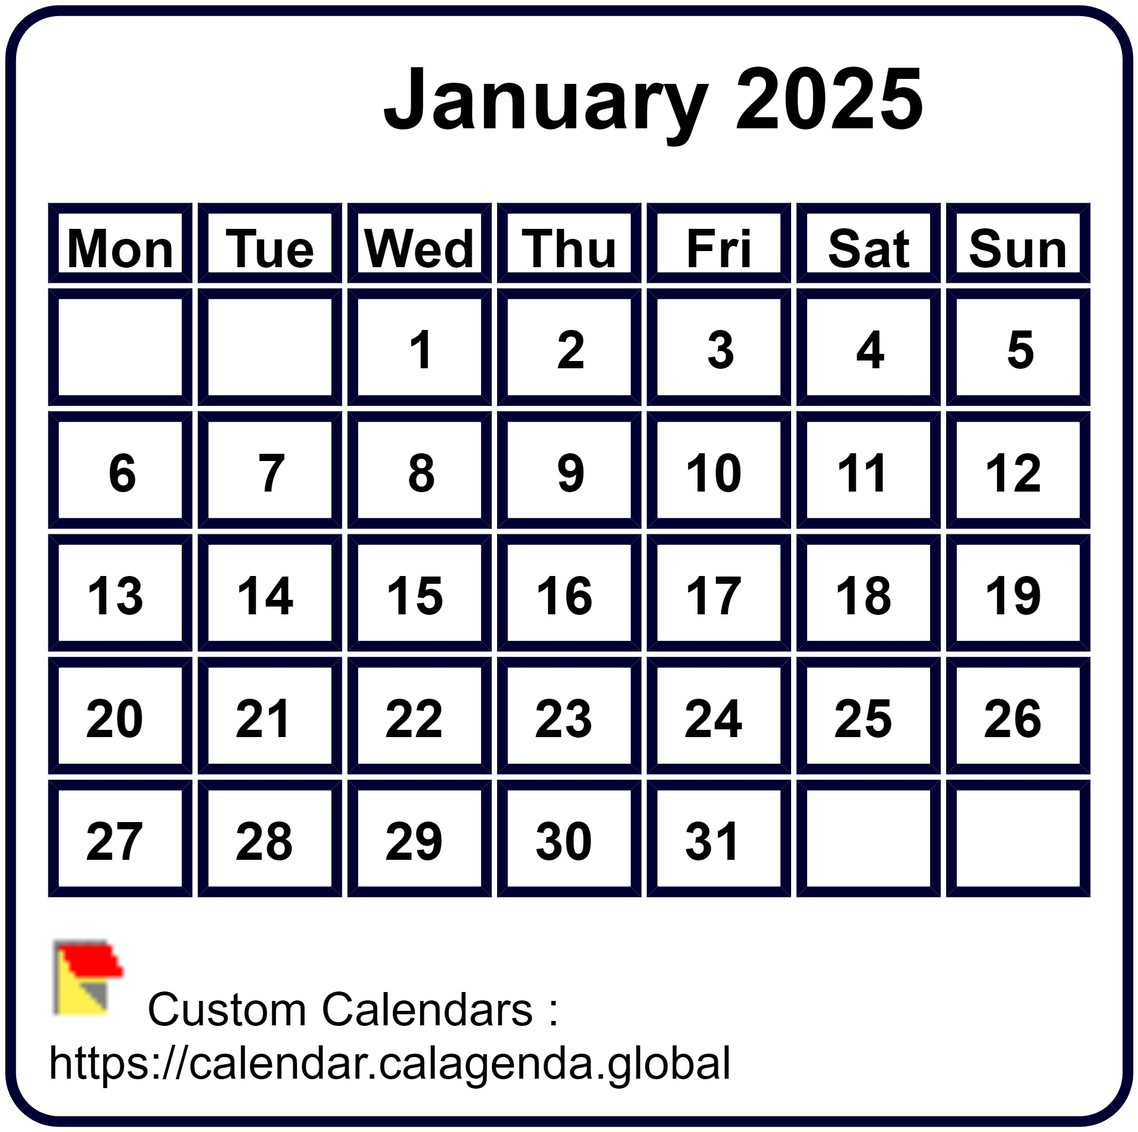 Calendar monthly 2025 to print, white background, tiny size, pocket size, special wallet